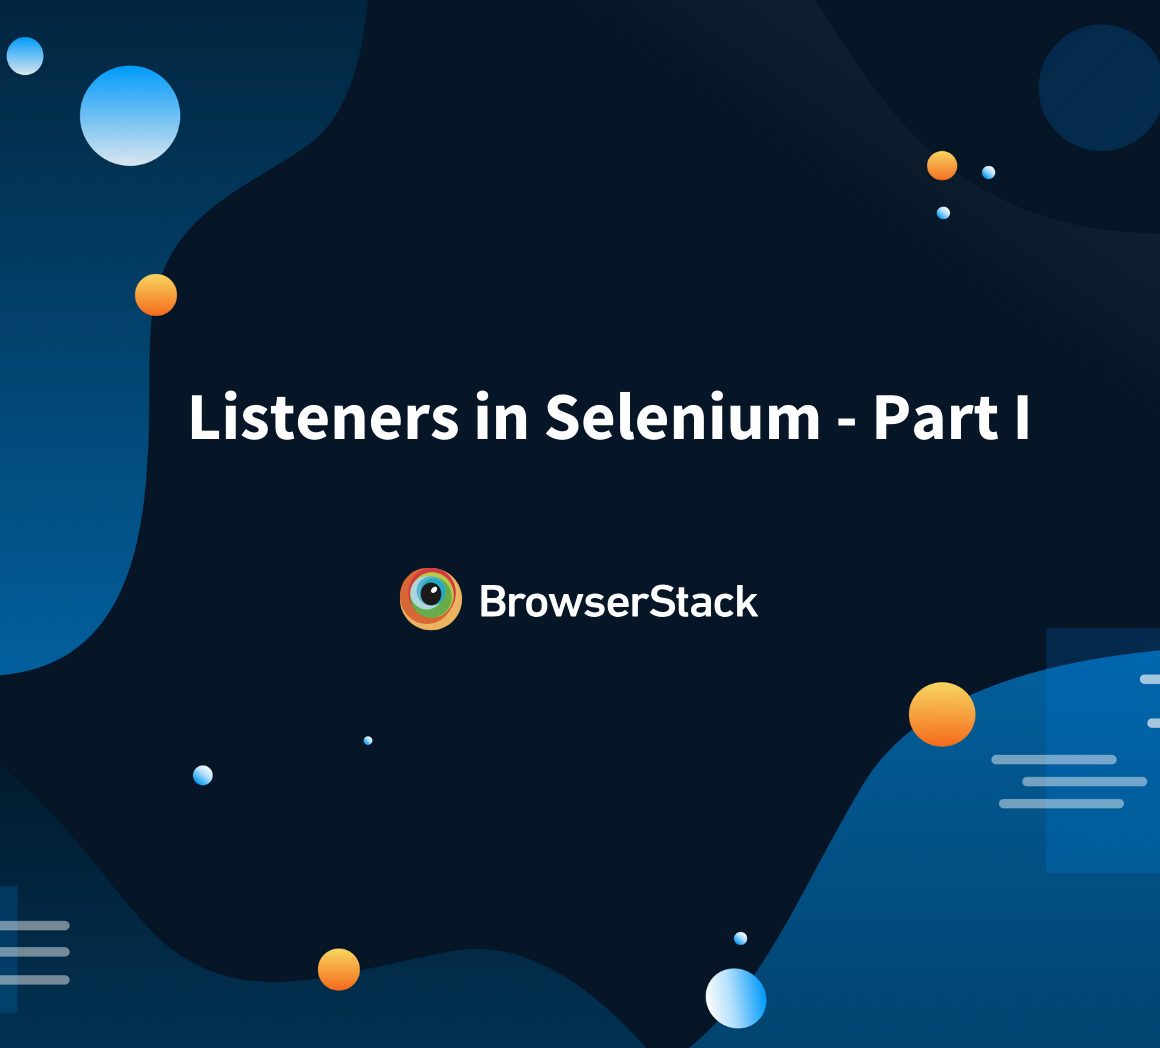 What are Listeners in Selenium - Part I